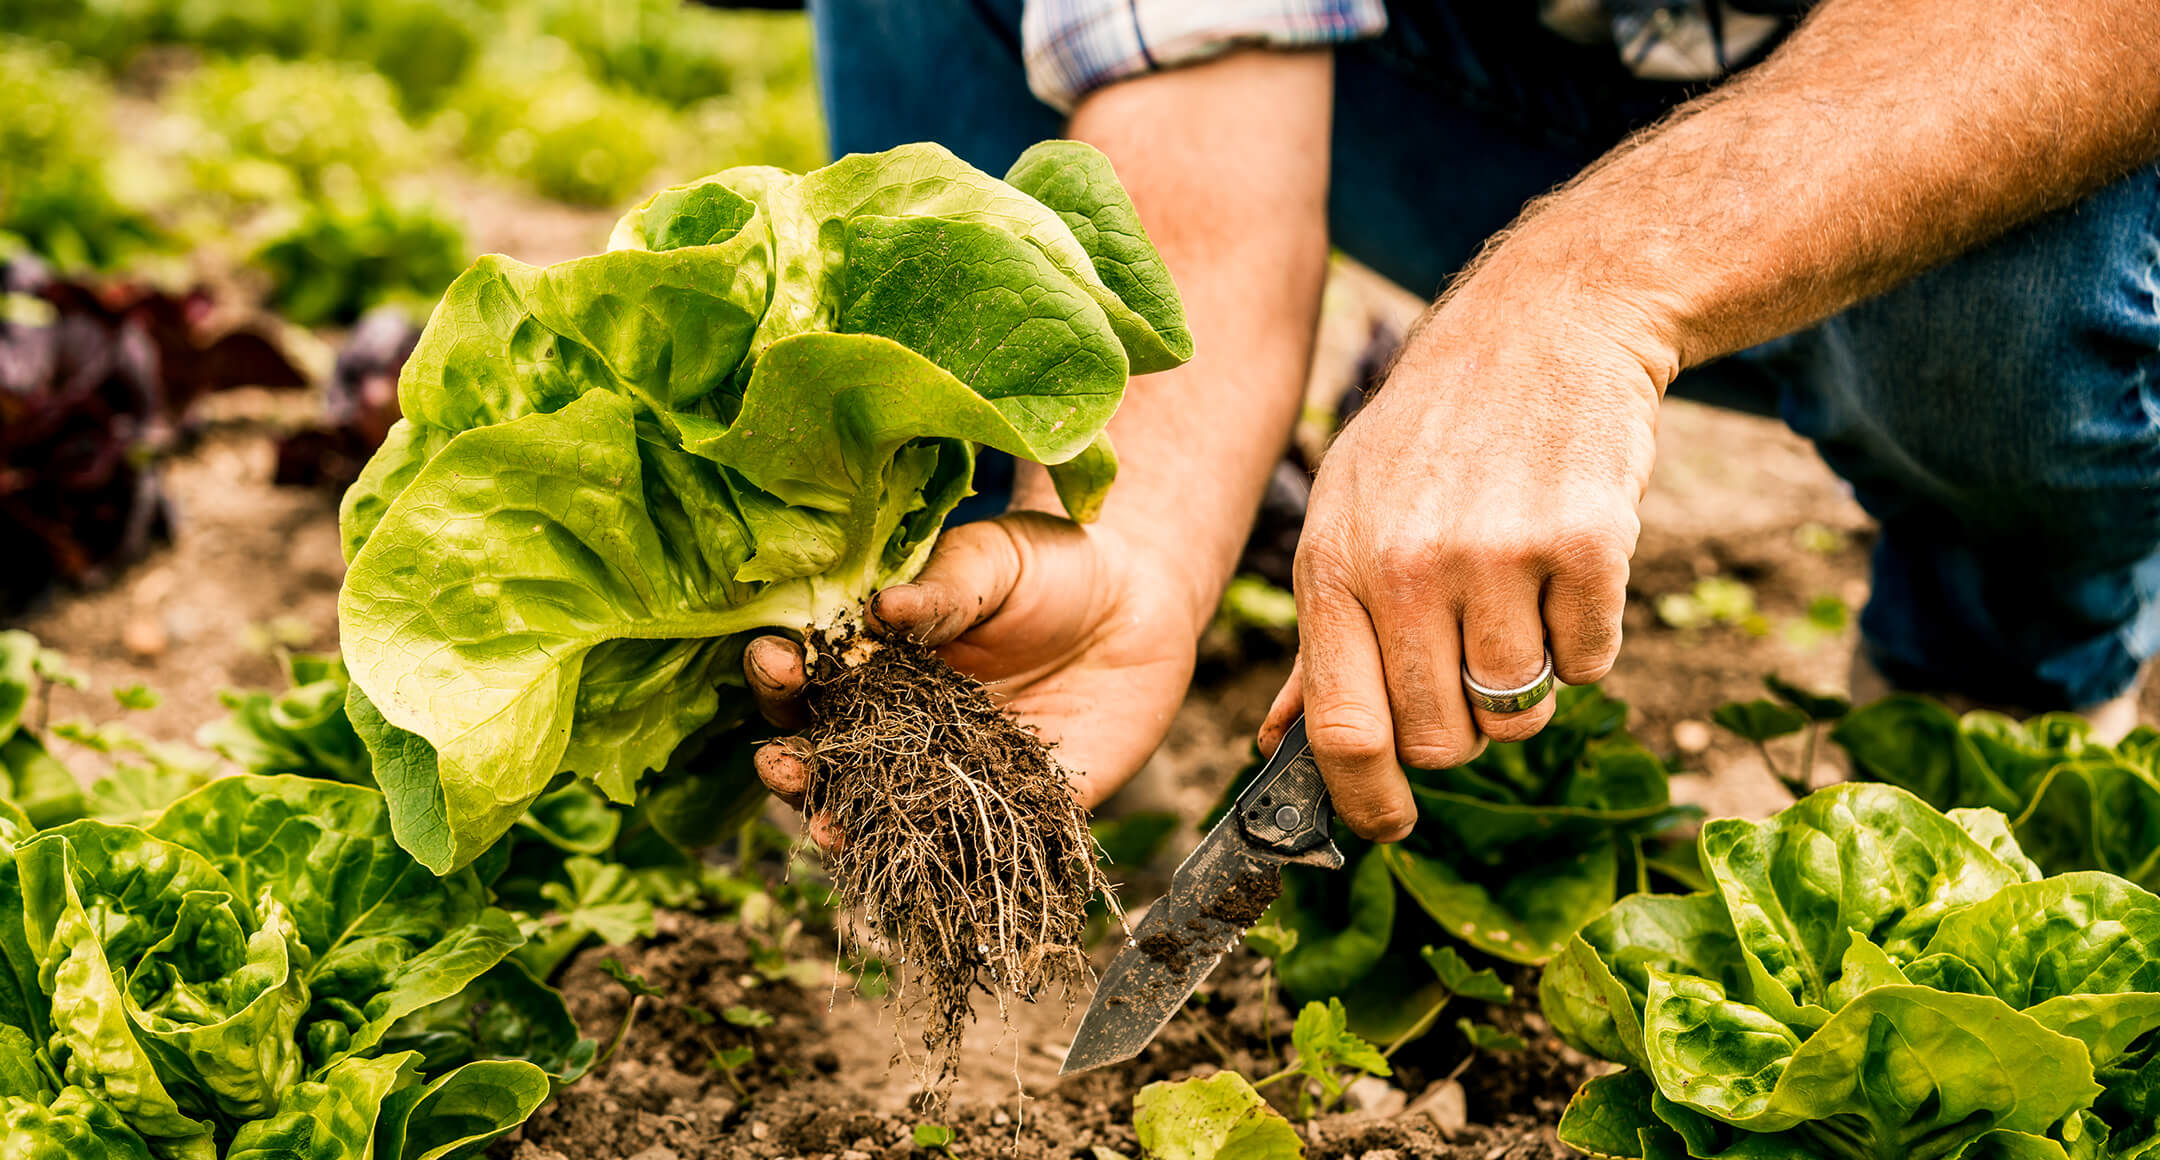 An image showing a close-up of two hands harvesting leafy greens from a garden bed. 